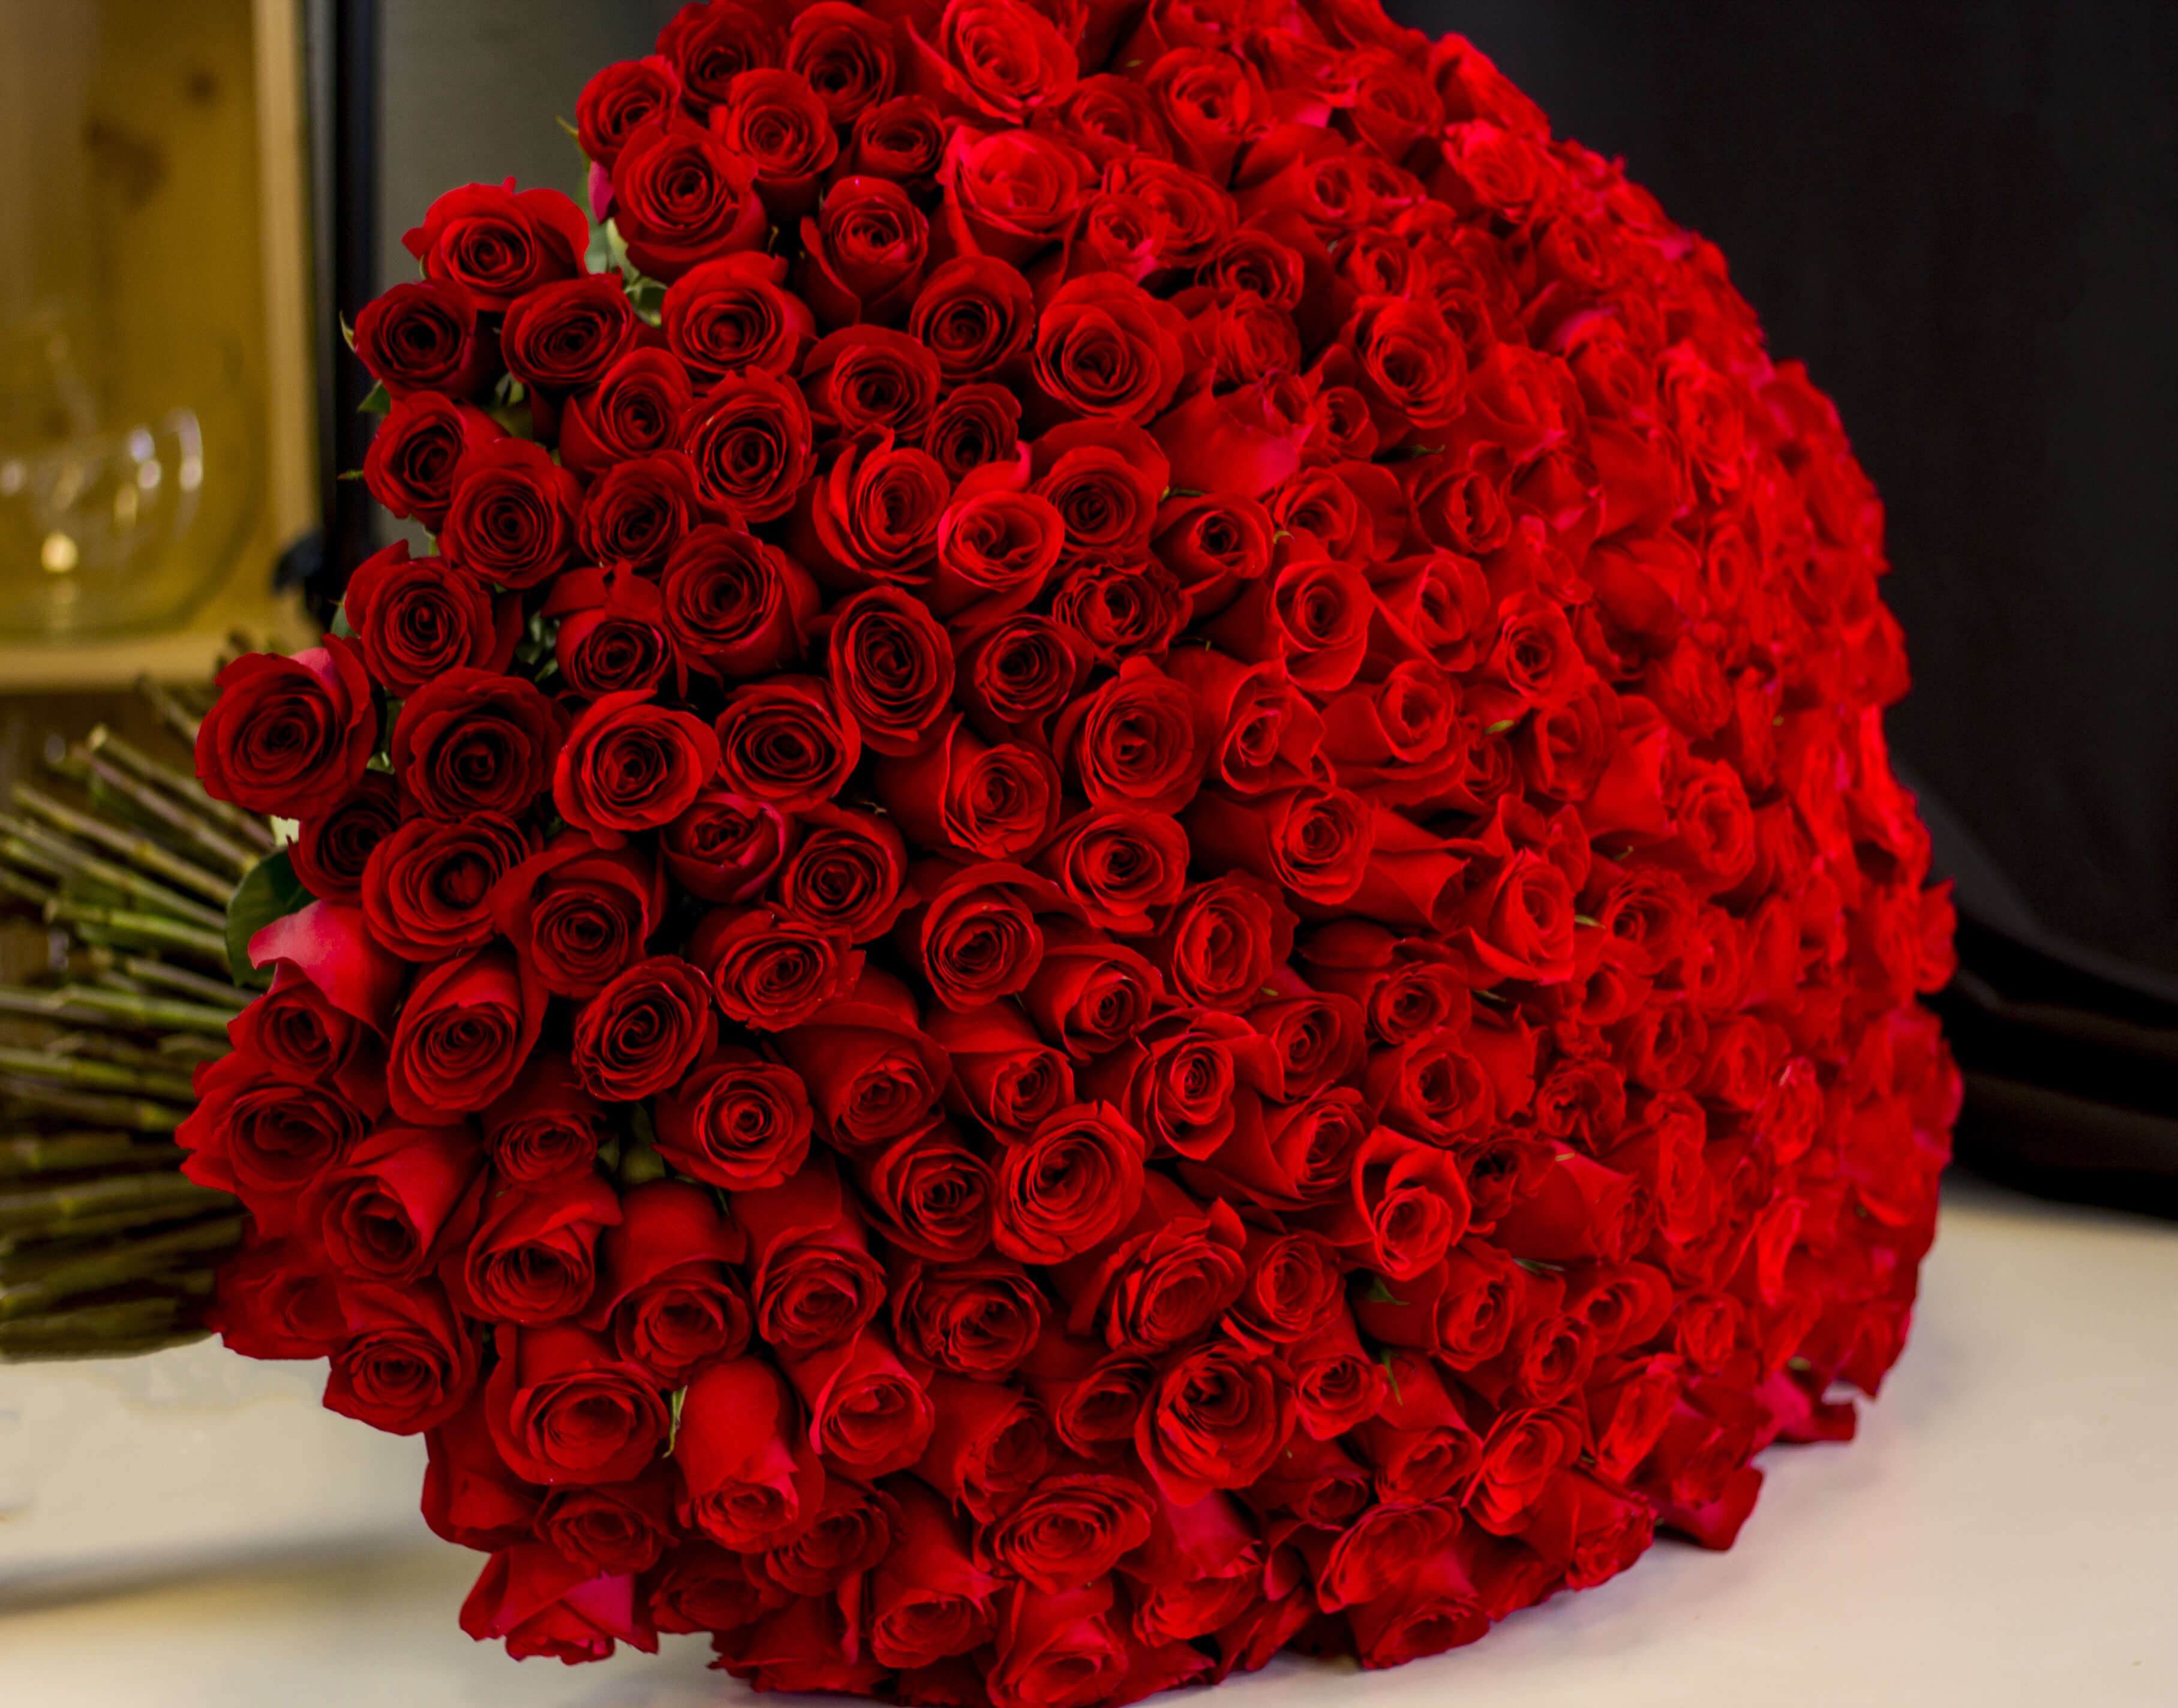 Bunch Of Red Roses For Valentine